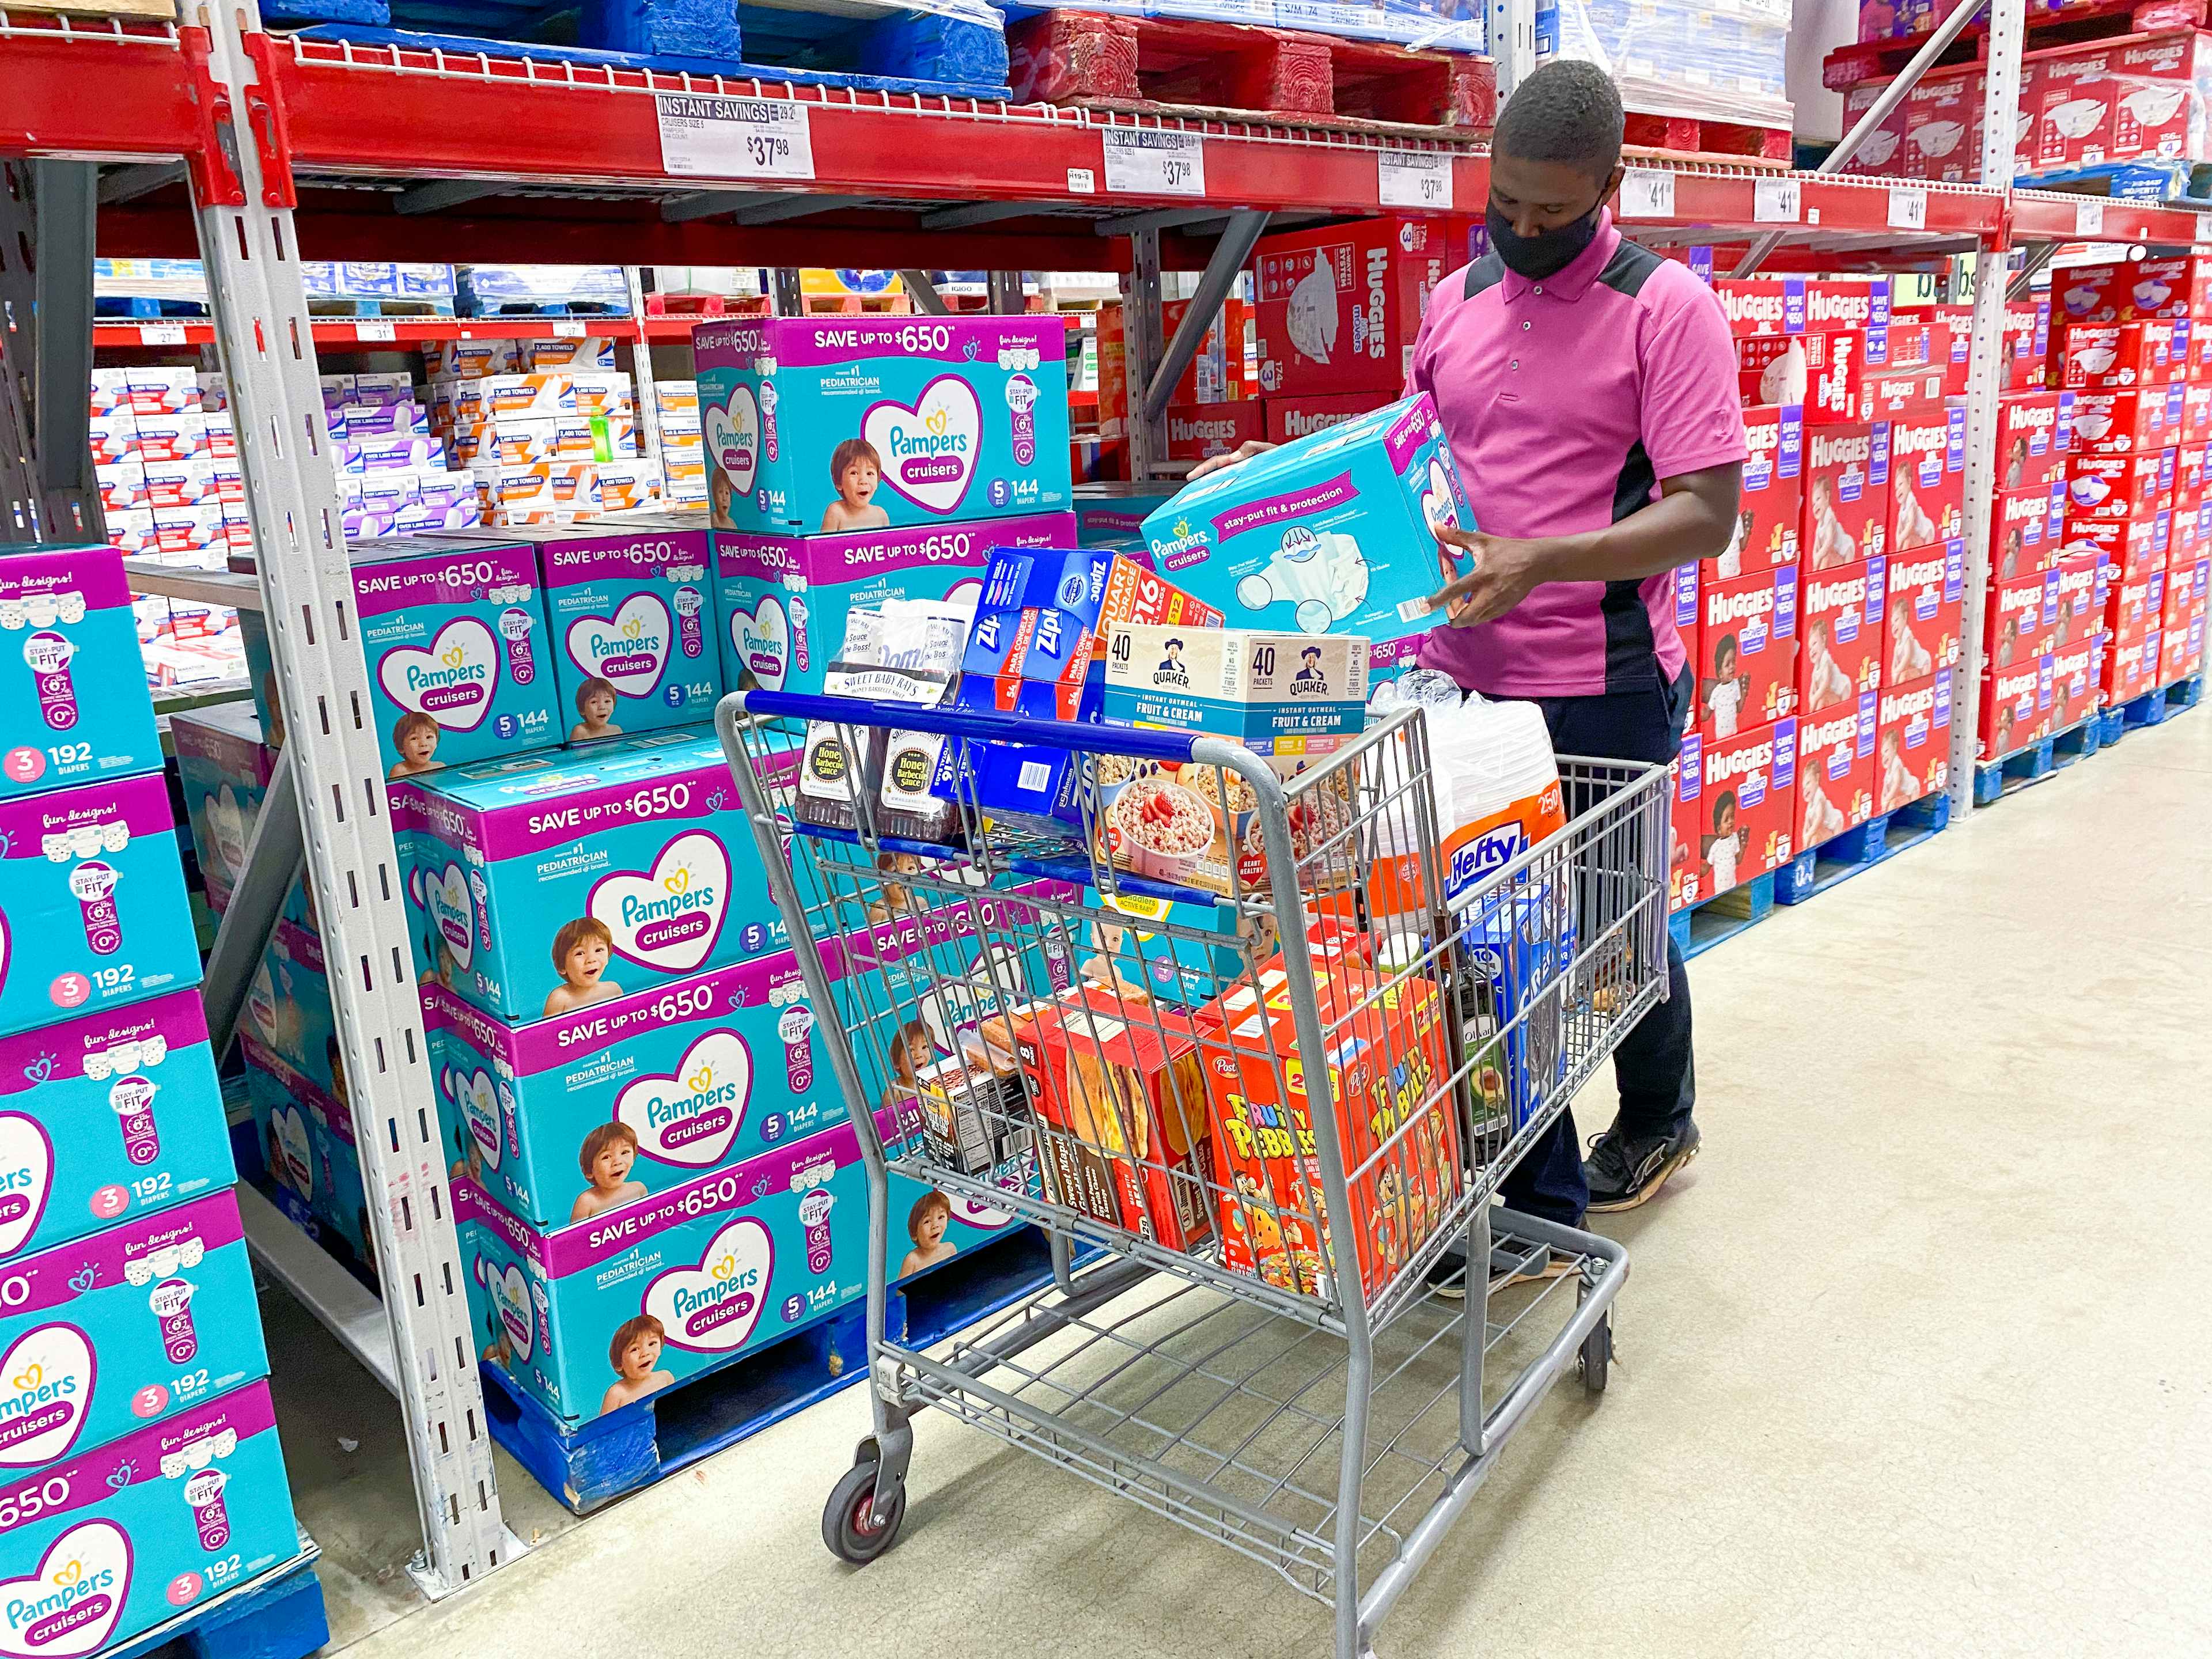 A man in the diaper aisle at Sam's Club putting a box of Pampers diapers into his shopping cart.